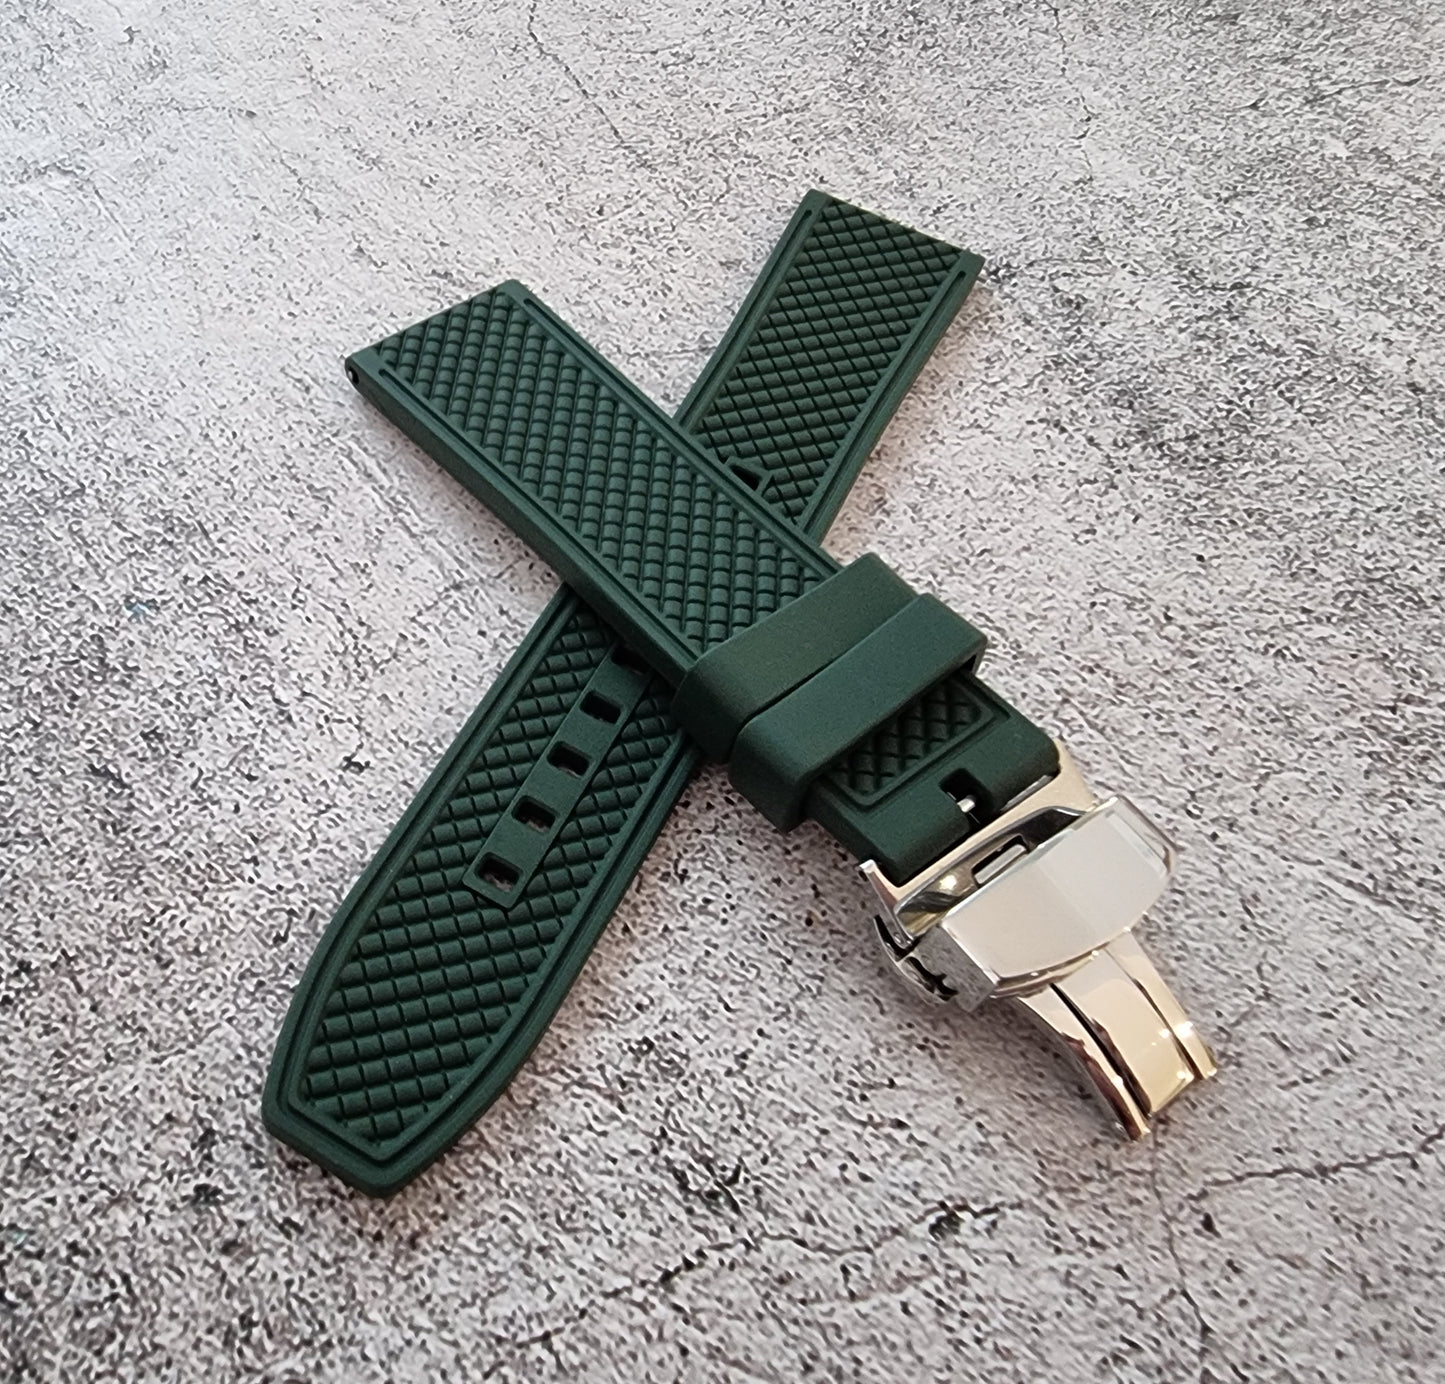 Superior Quality FKM Rubber Butterfly Deployment Watch Strap Band 20mm 22mm